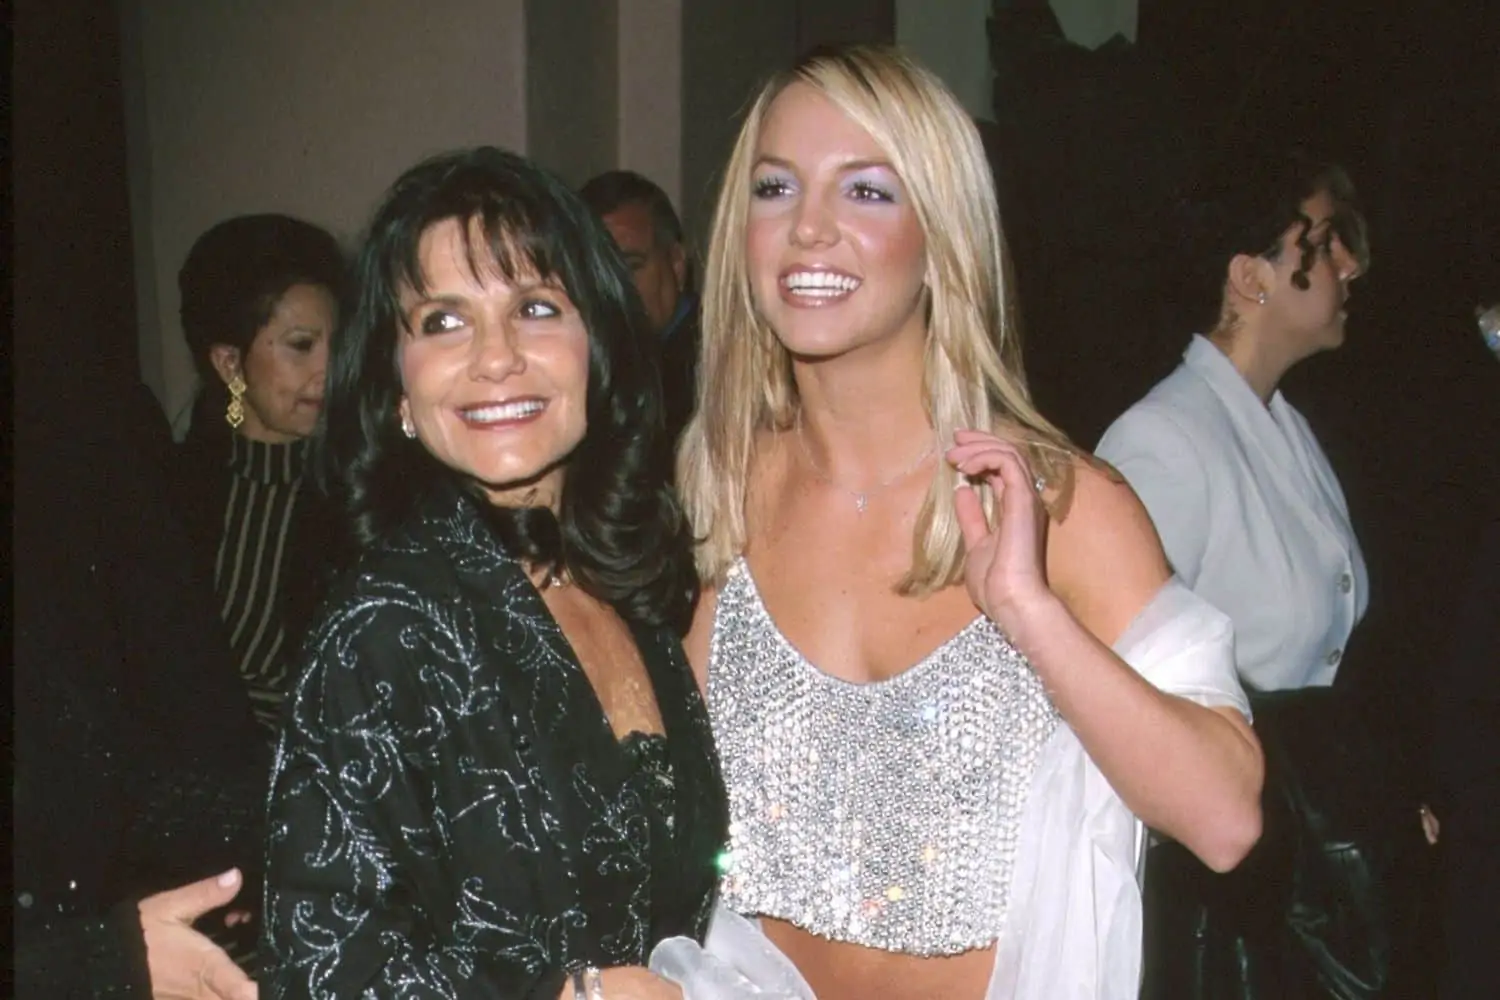 The drama isn't over - Britney blames her mother for 13-year conservatorship